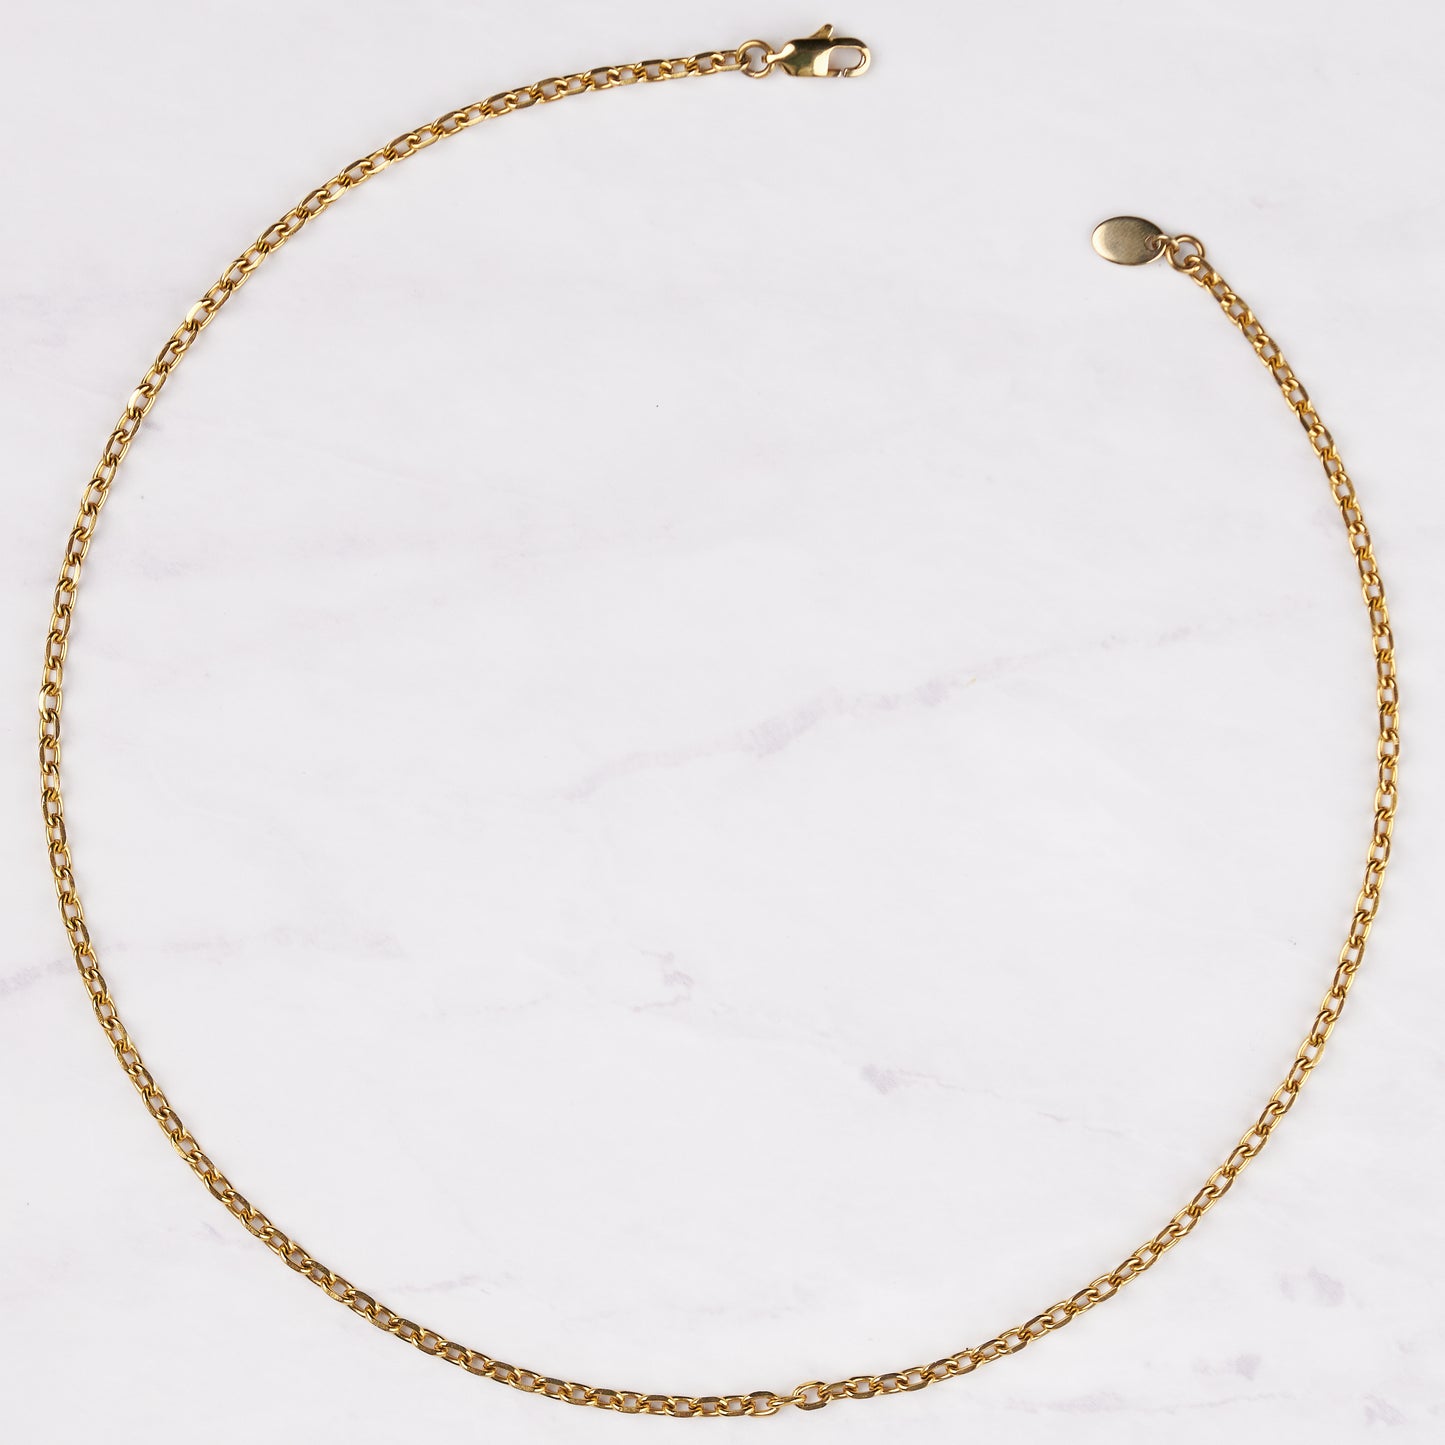 Charlotte Necklace in Gold - 3mm